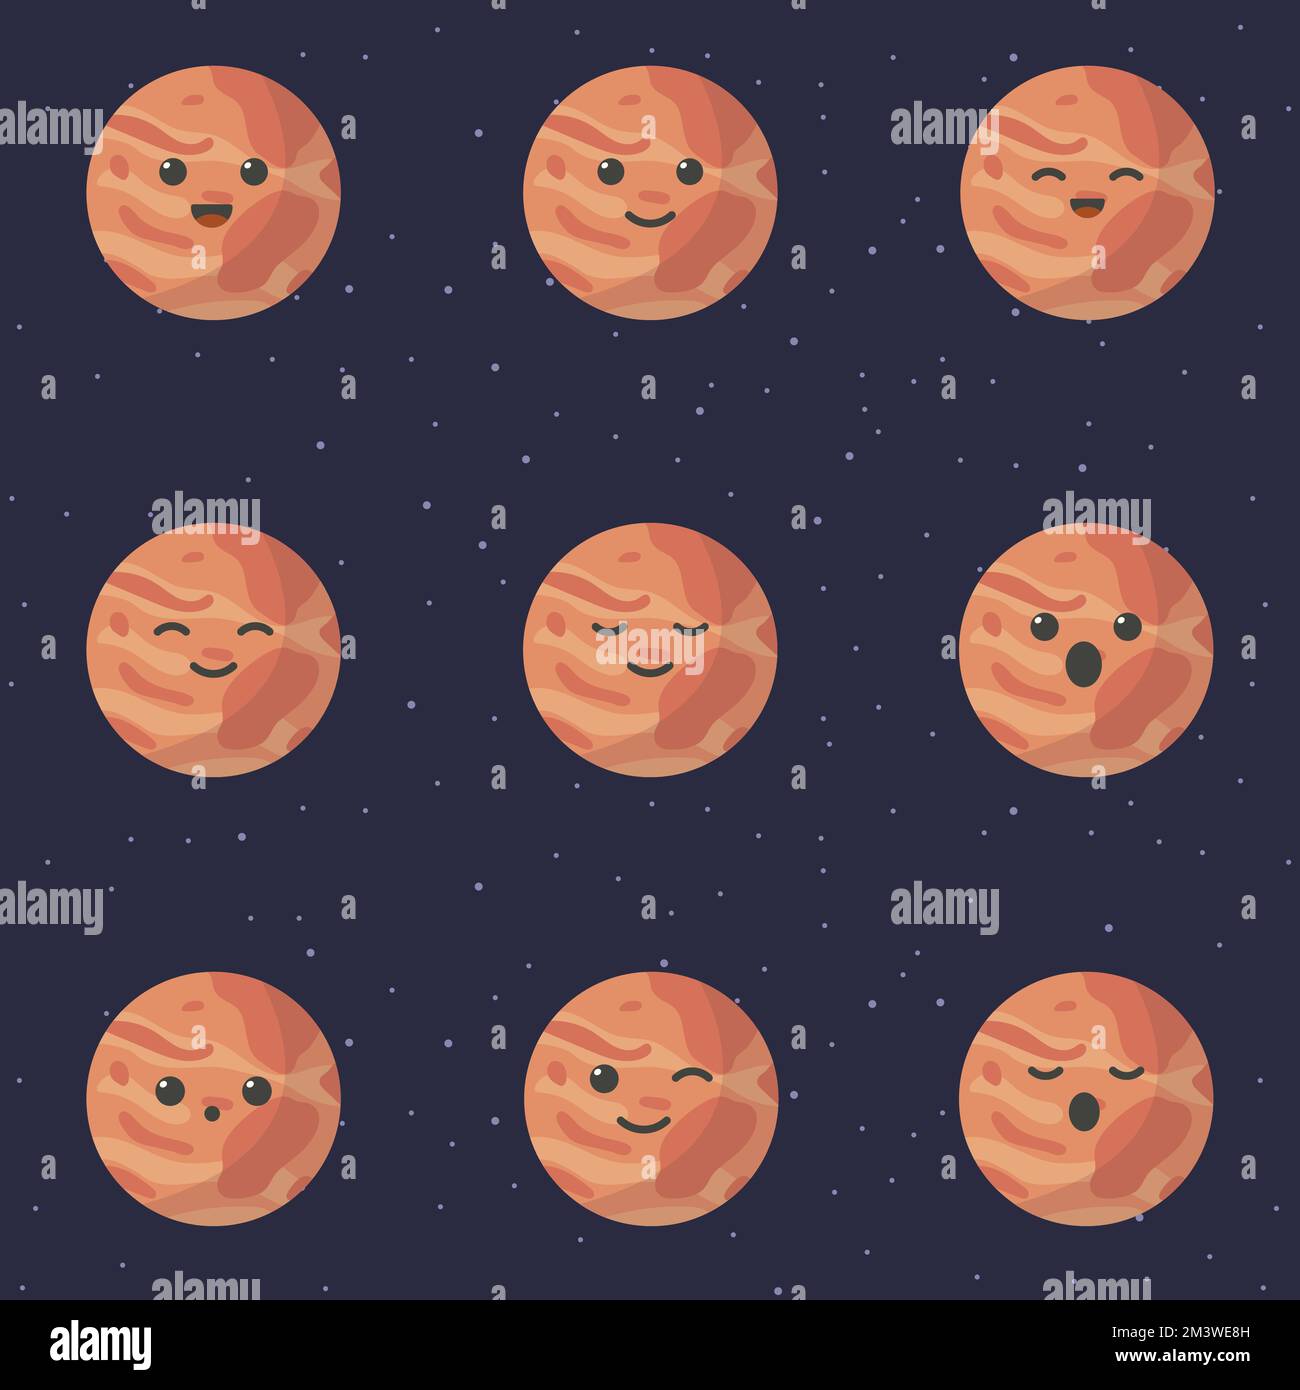 Cute planet mars cartoon character. Set of cute cartoon planets with different emotions. Vector illustration Stock Vector